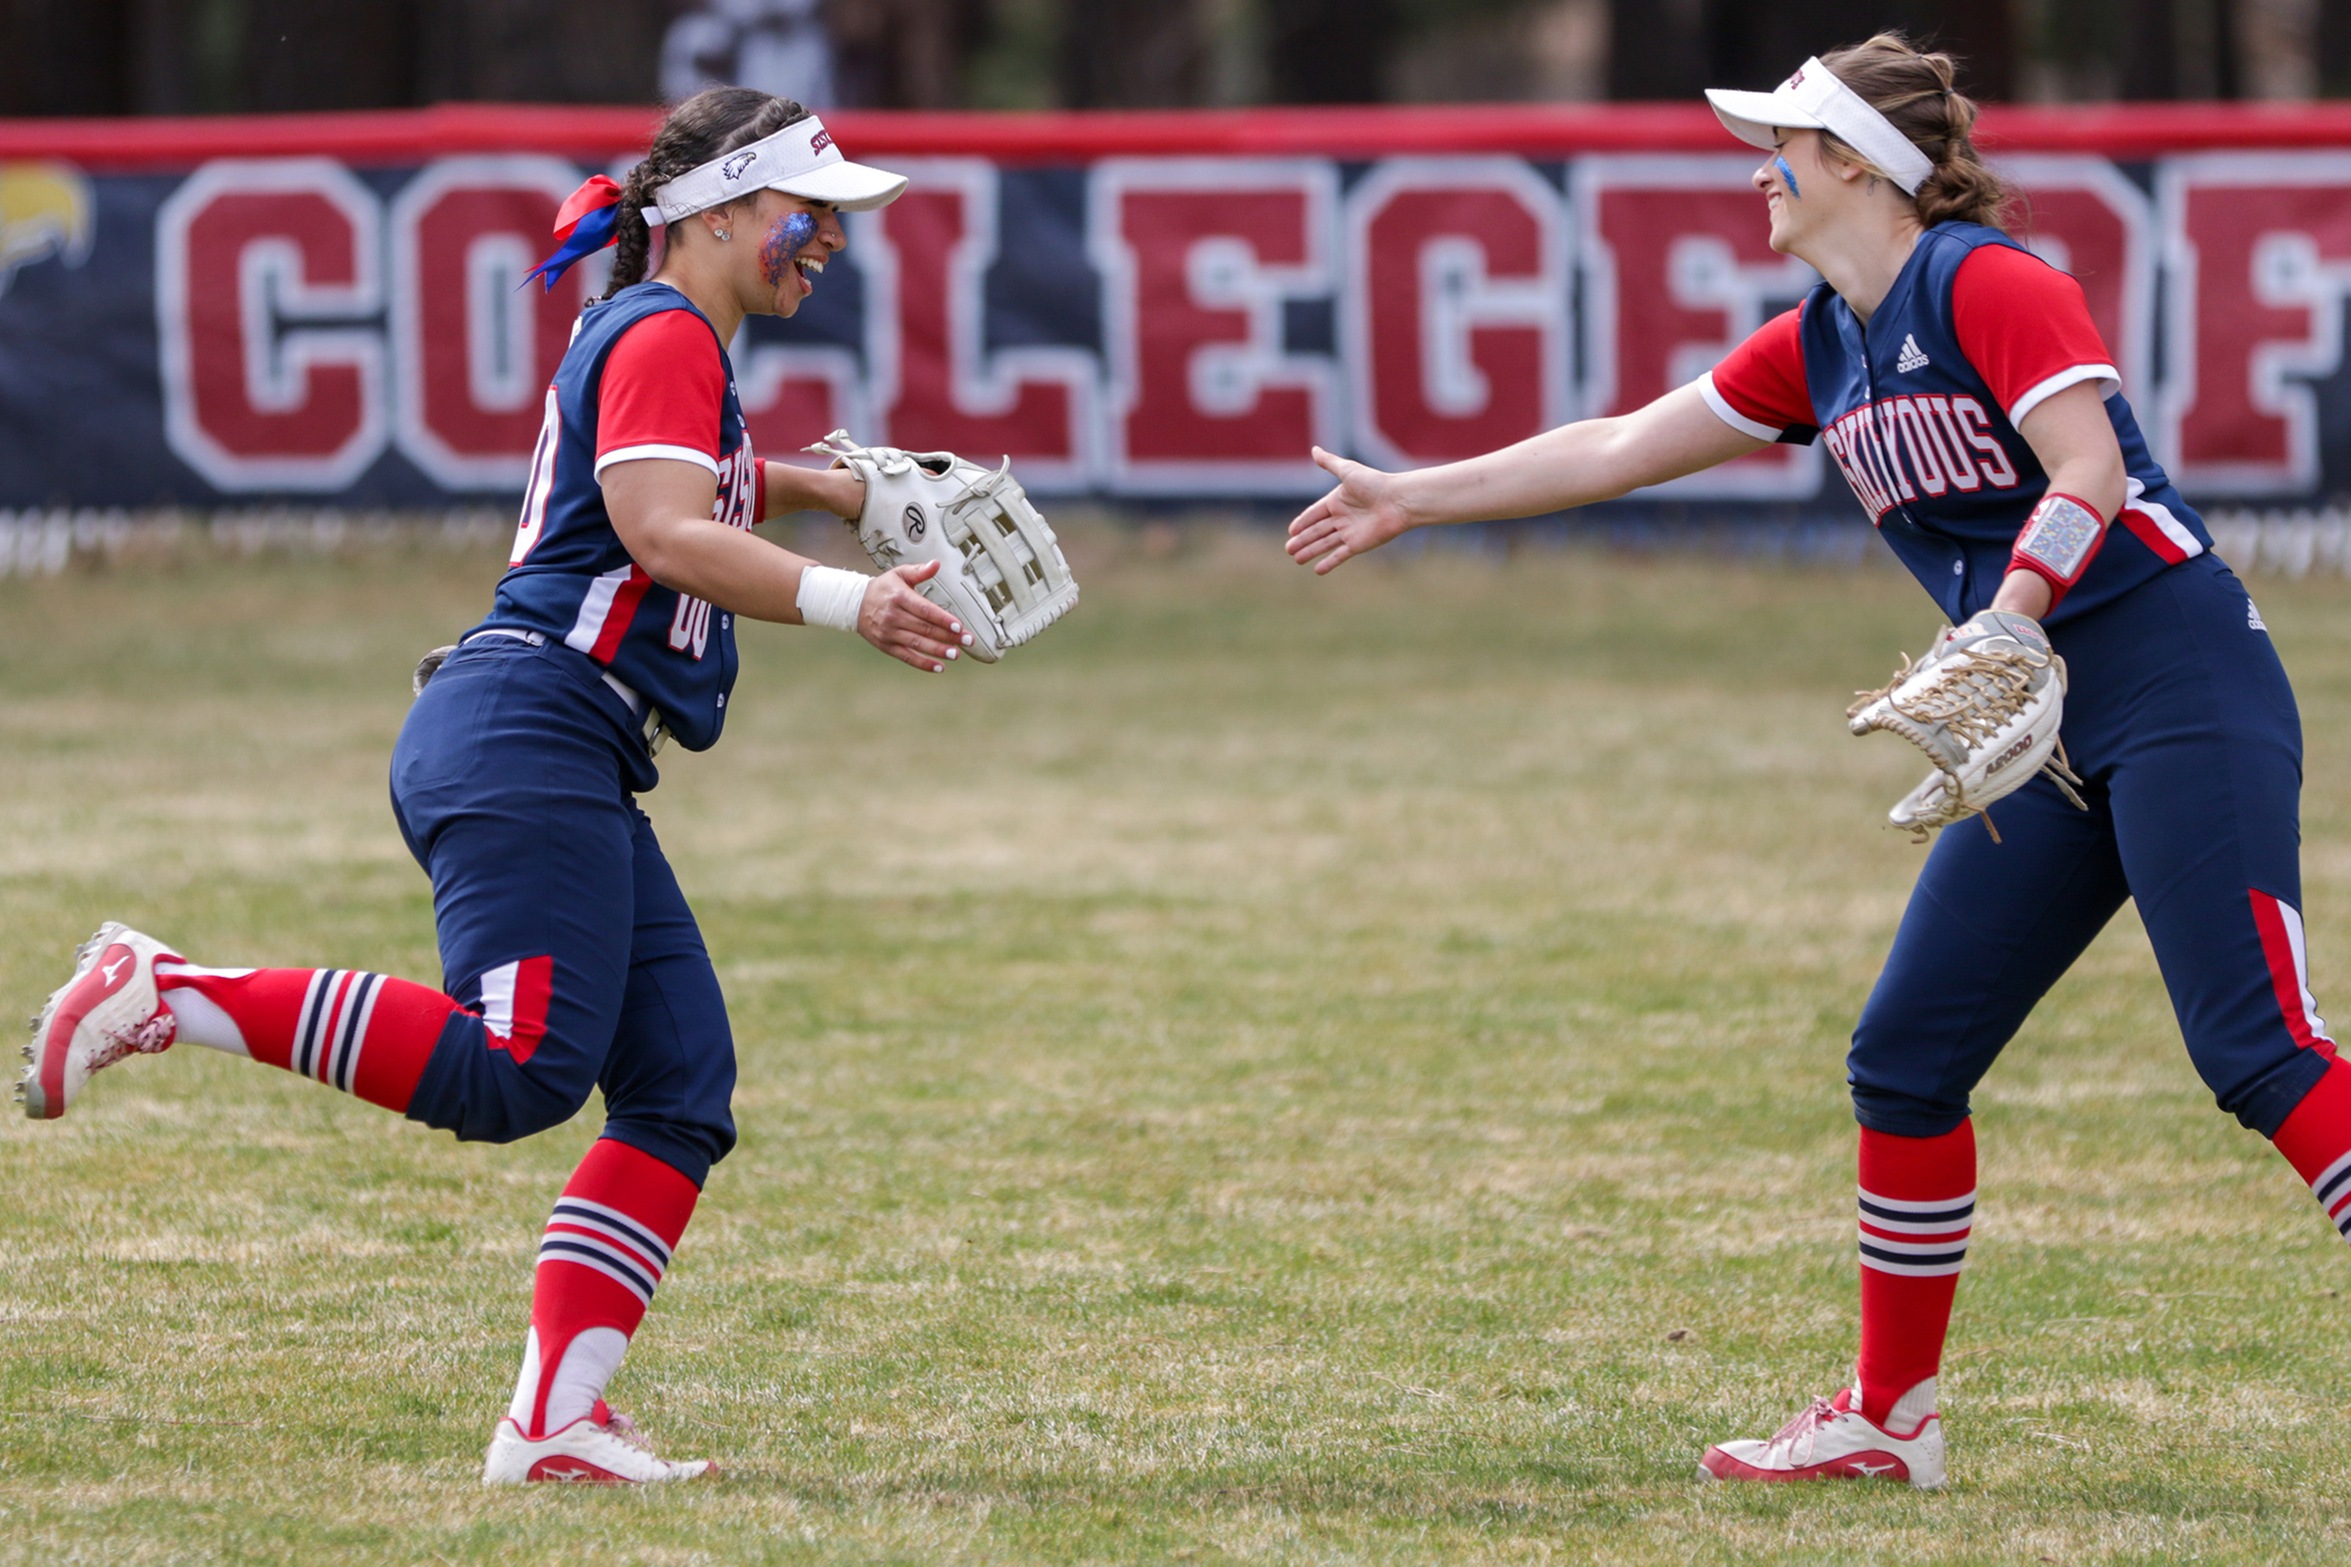 Eagle Softball Starts Fast in Conference